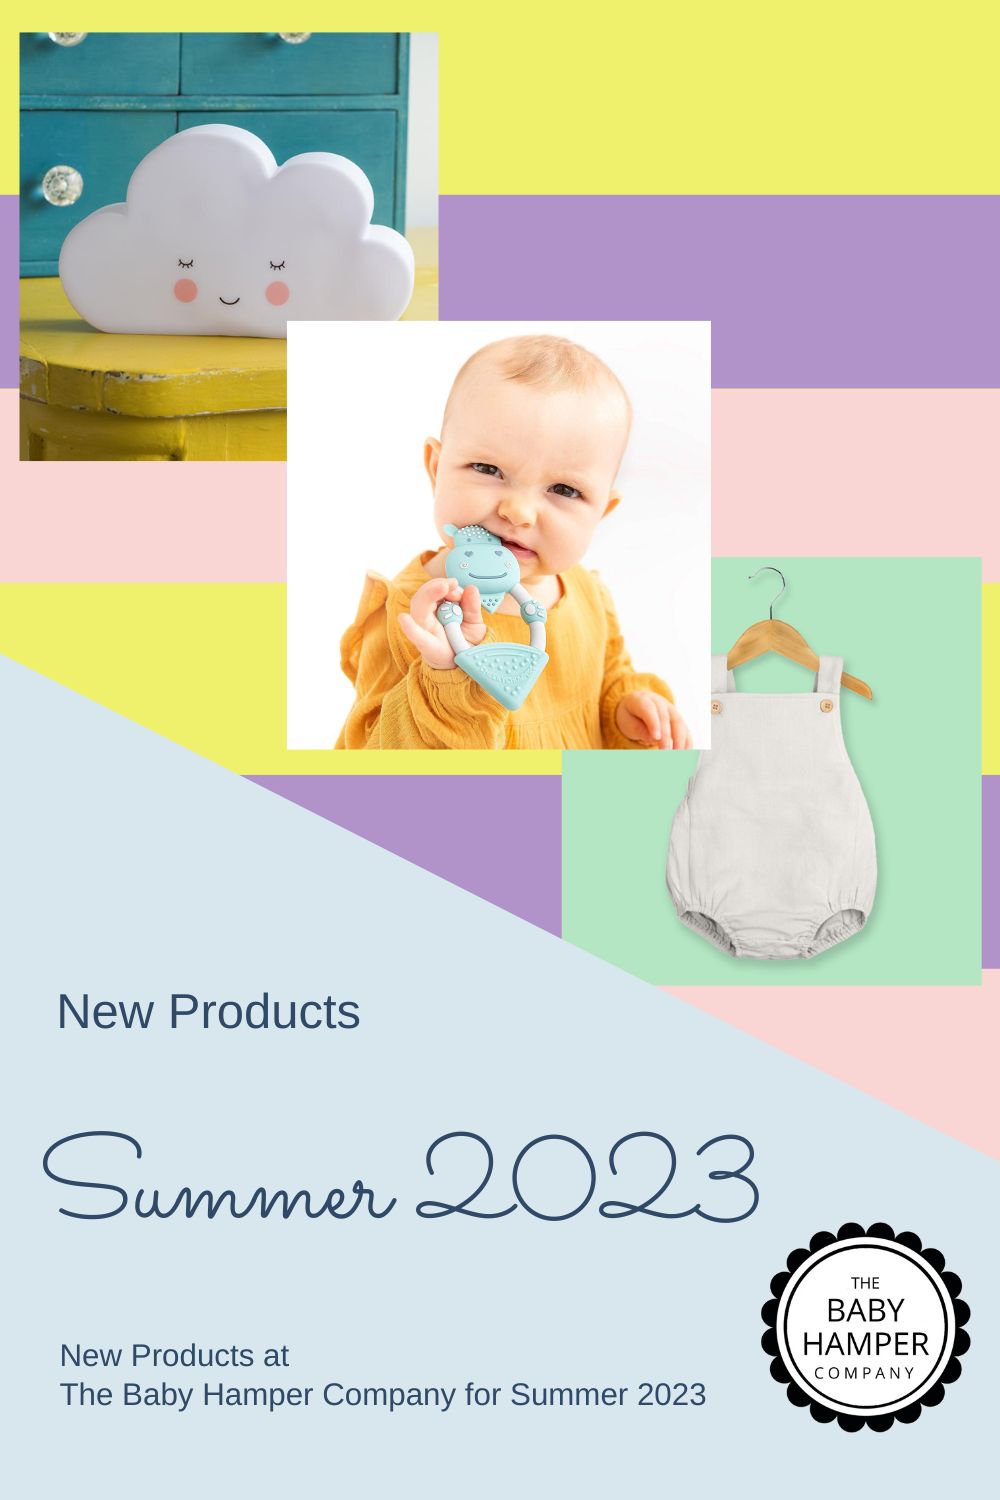 New Products at The Baby Hamper Company for Summer 2023